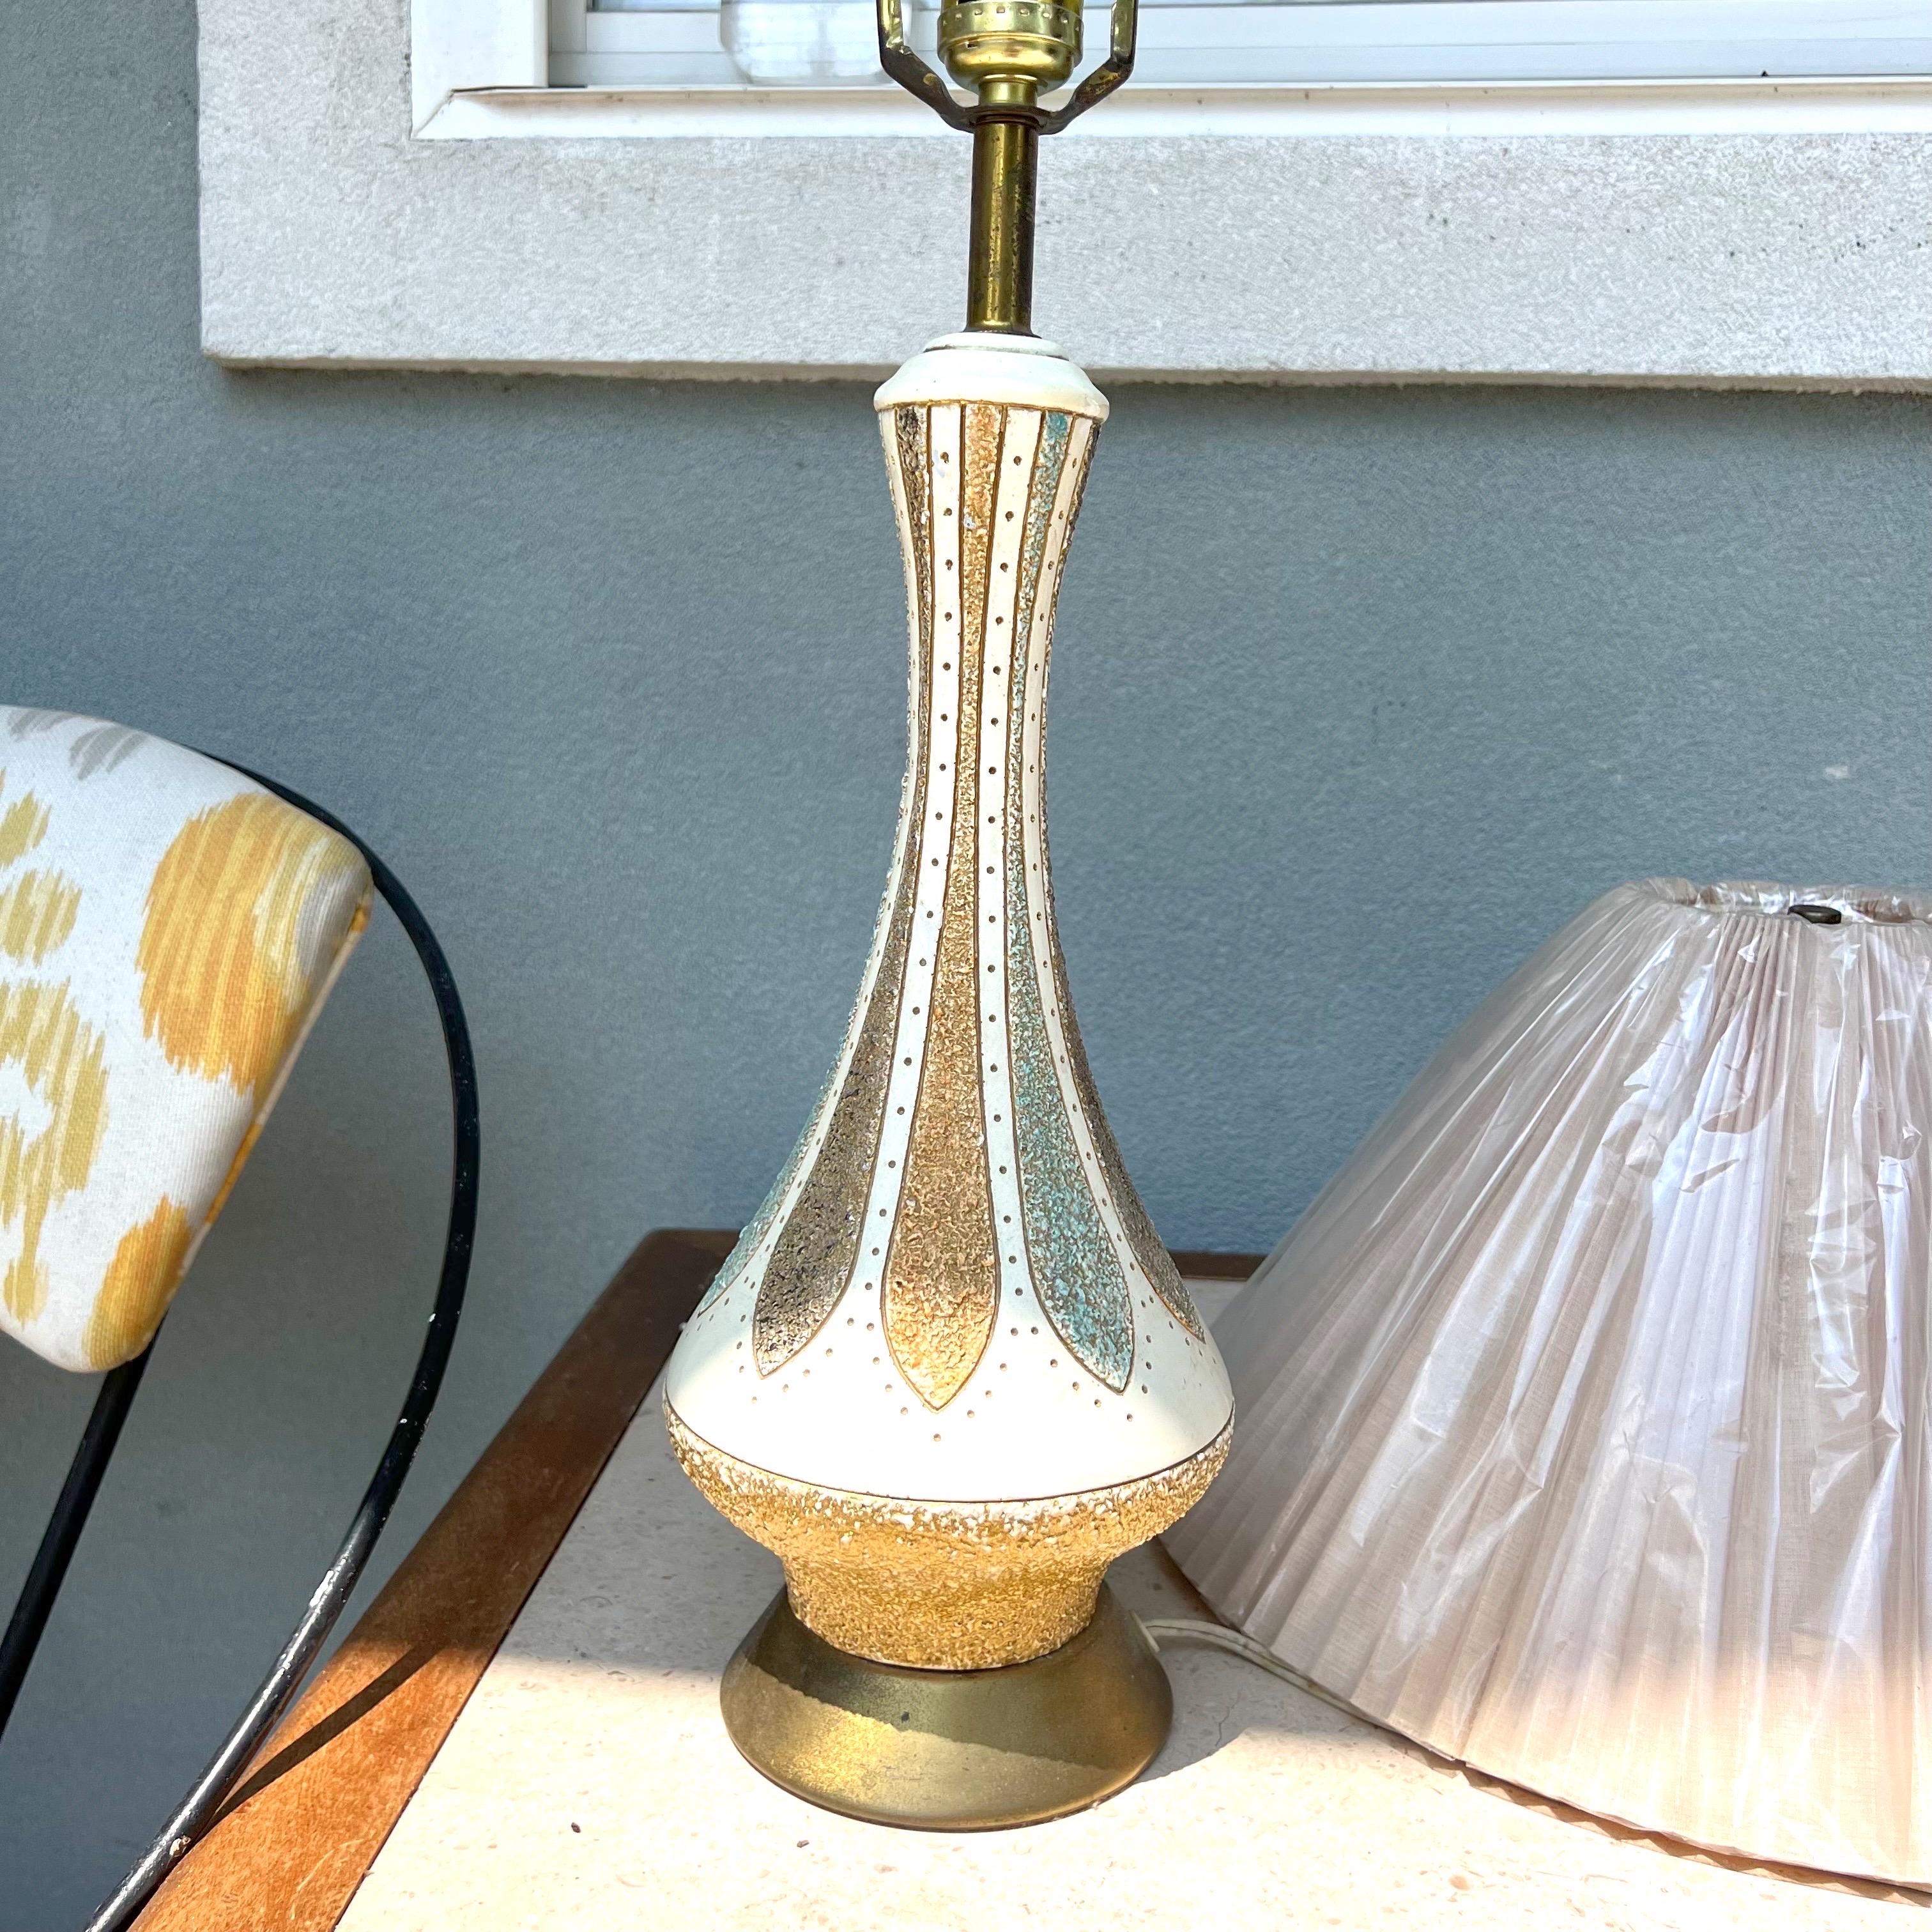 20th Century Mid-Century Modern Atomic Lamp With Pleated Shade For Sale